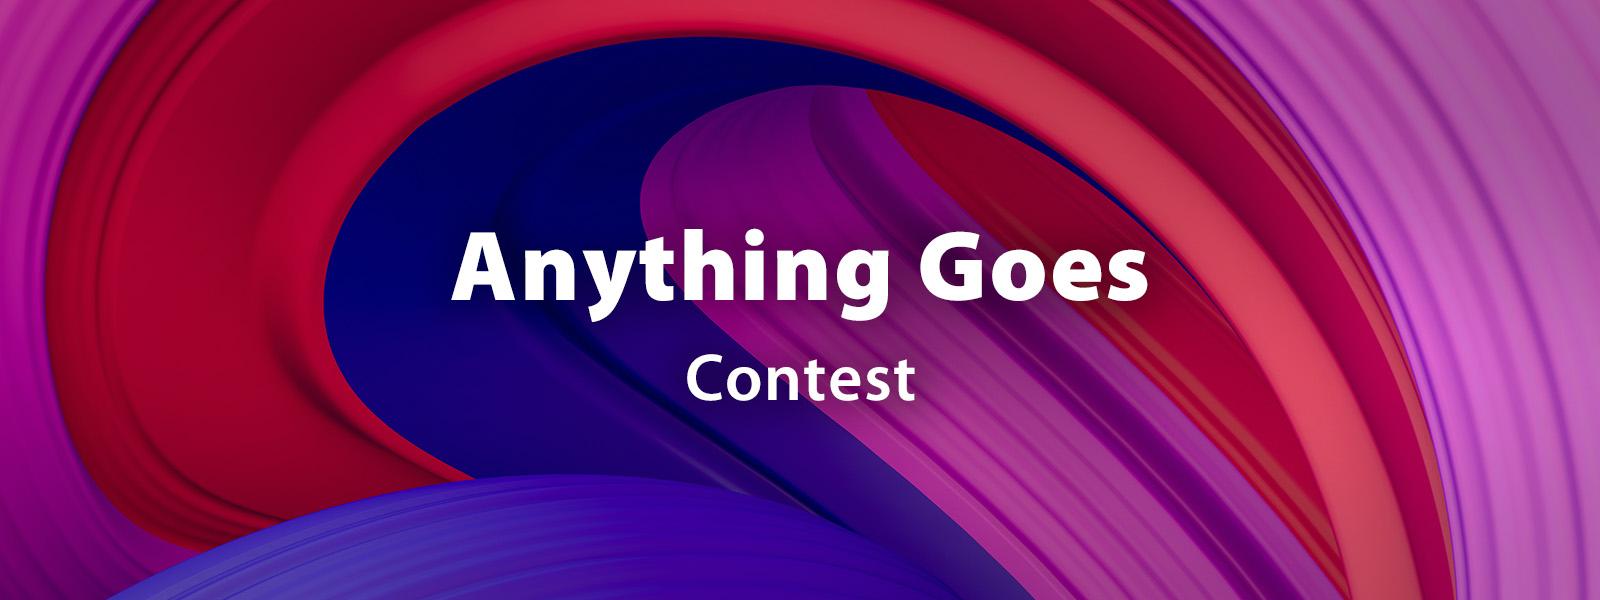 Anything Goes Contest